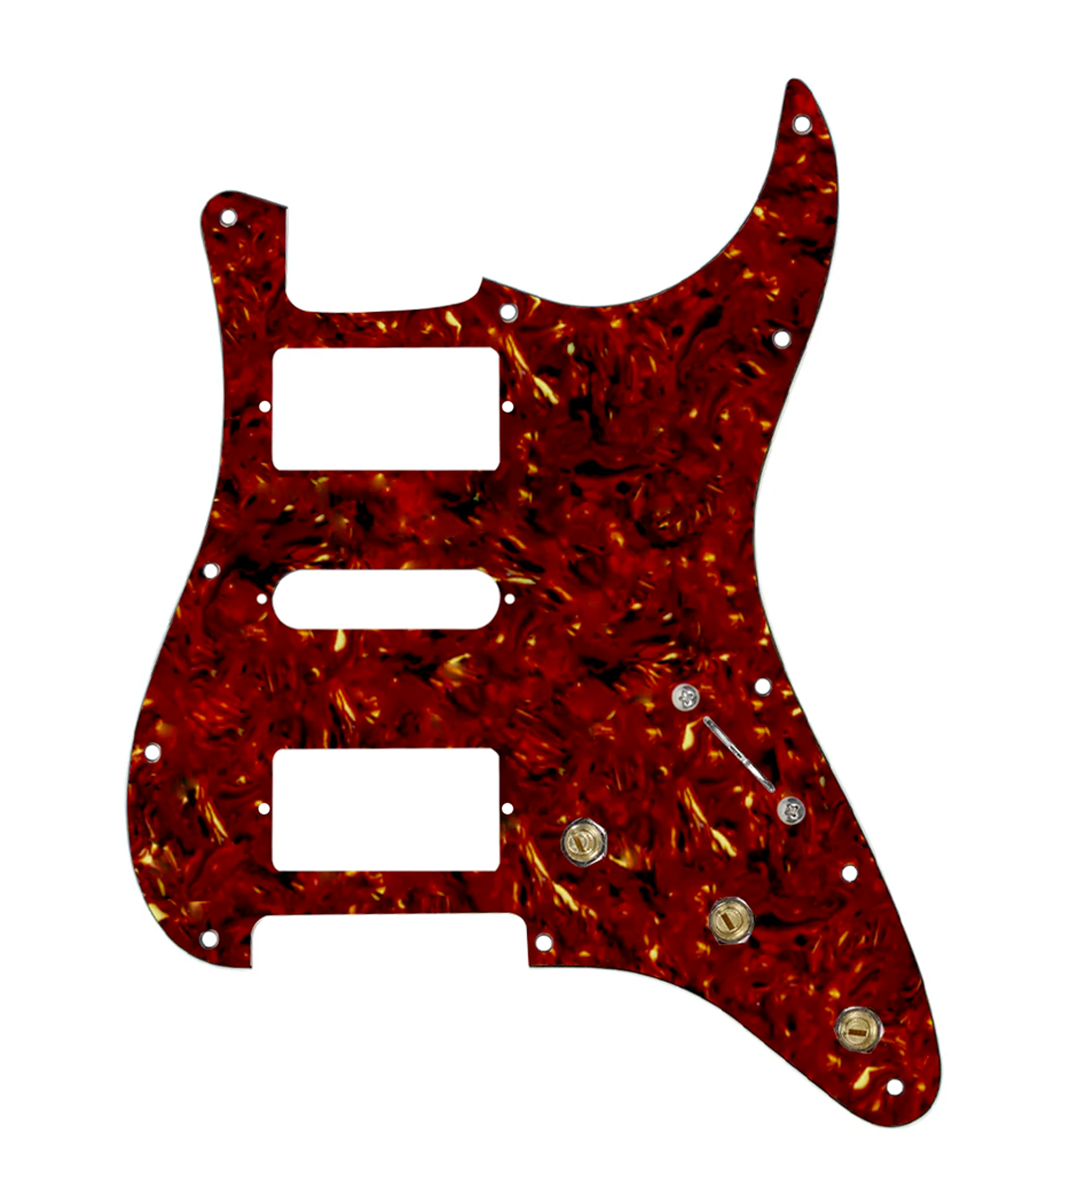 Pre-Wired HSH Stratocaster® Pickguard - SWPG-HSH-TPG-S5W-HSH-BL